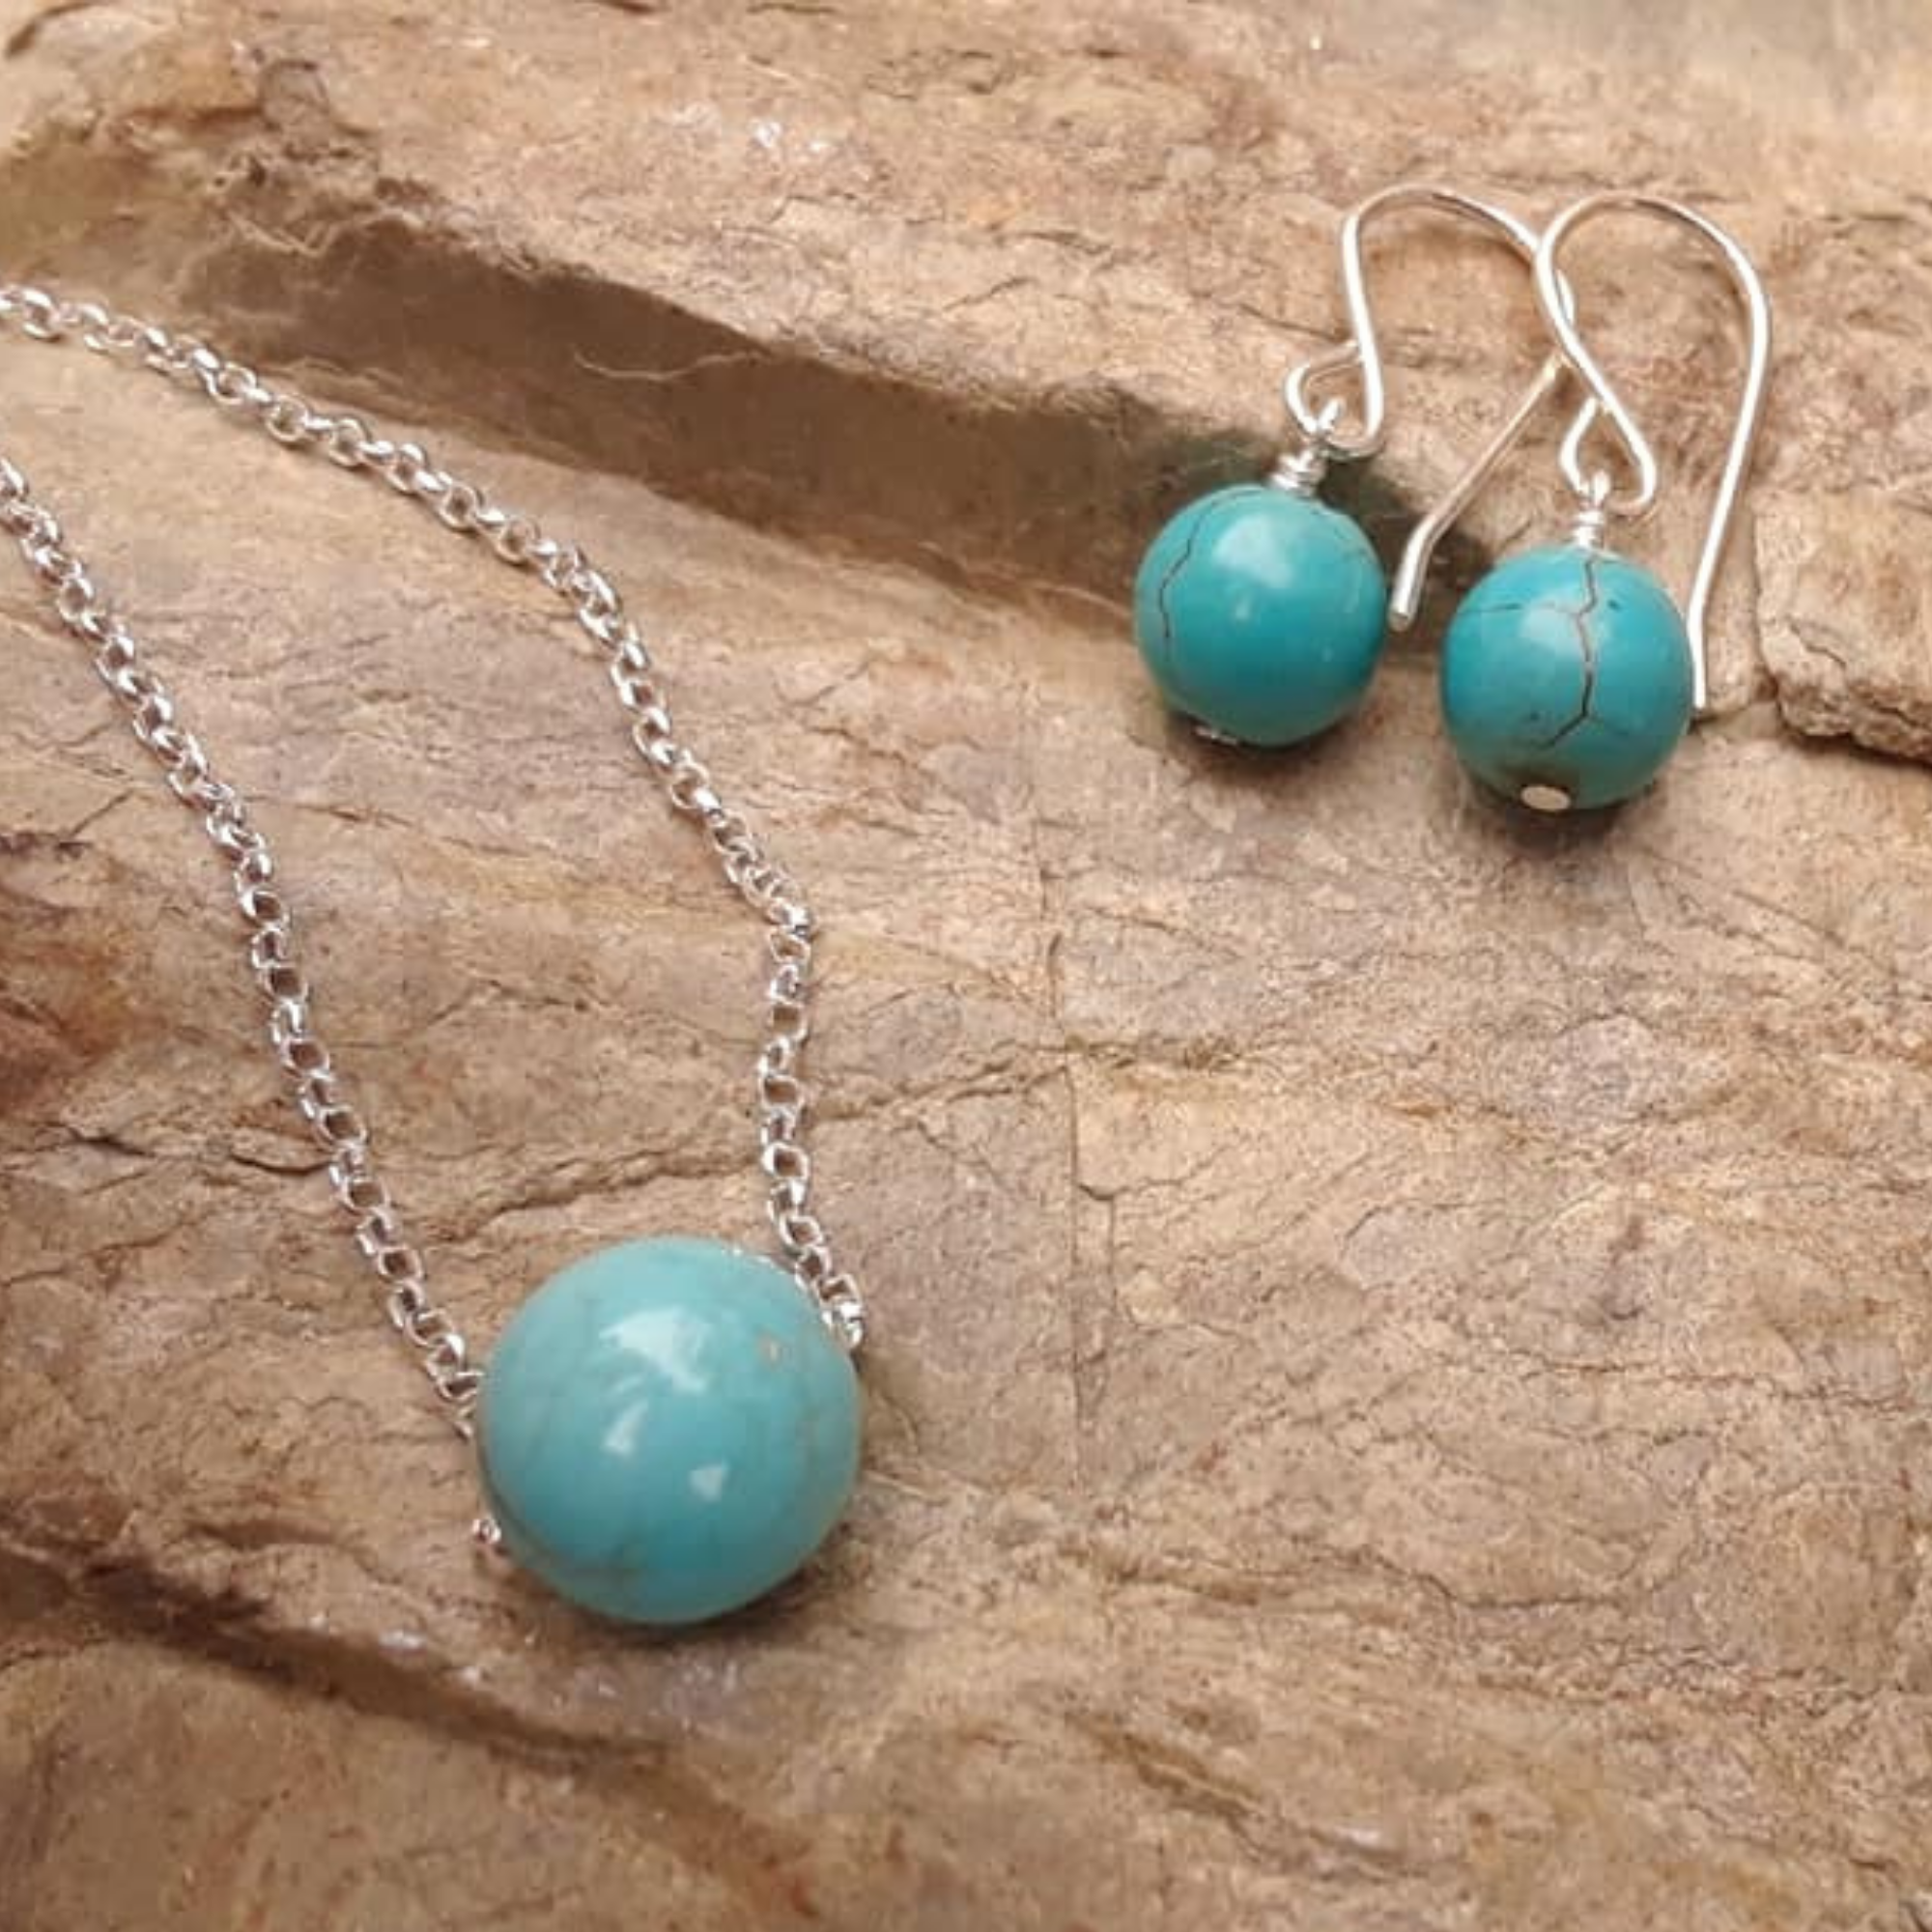 Turquoise Howlite Intention Earrings